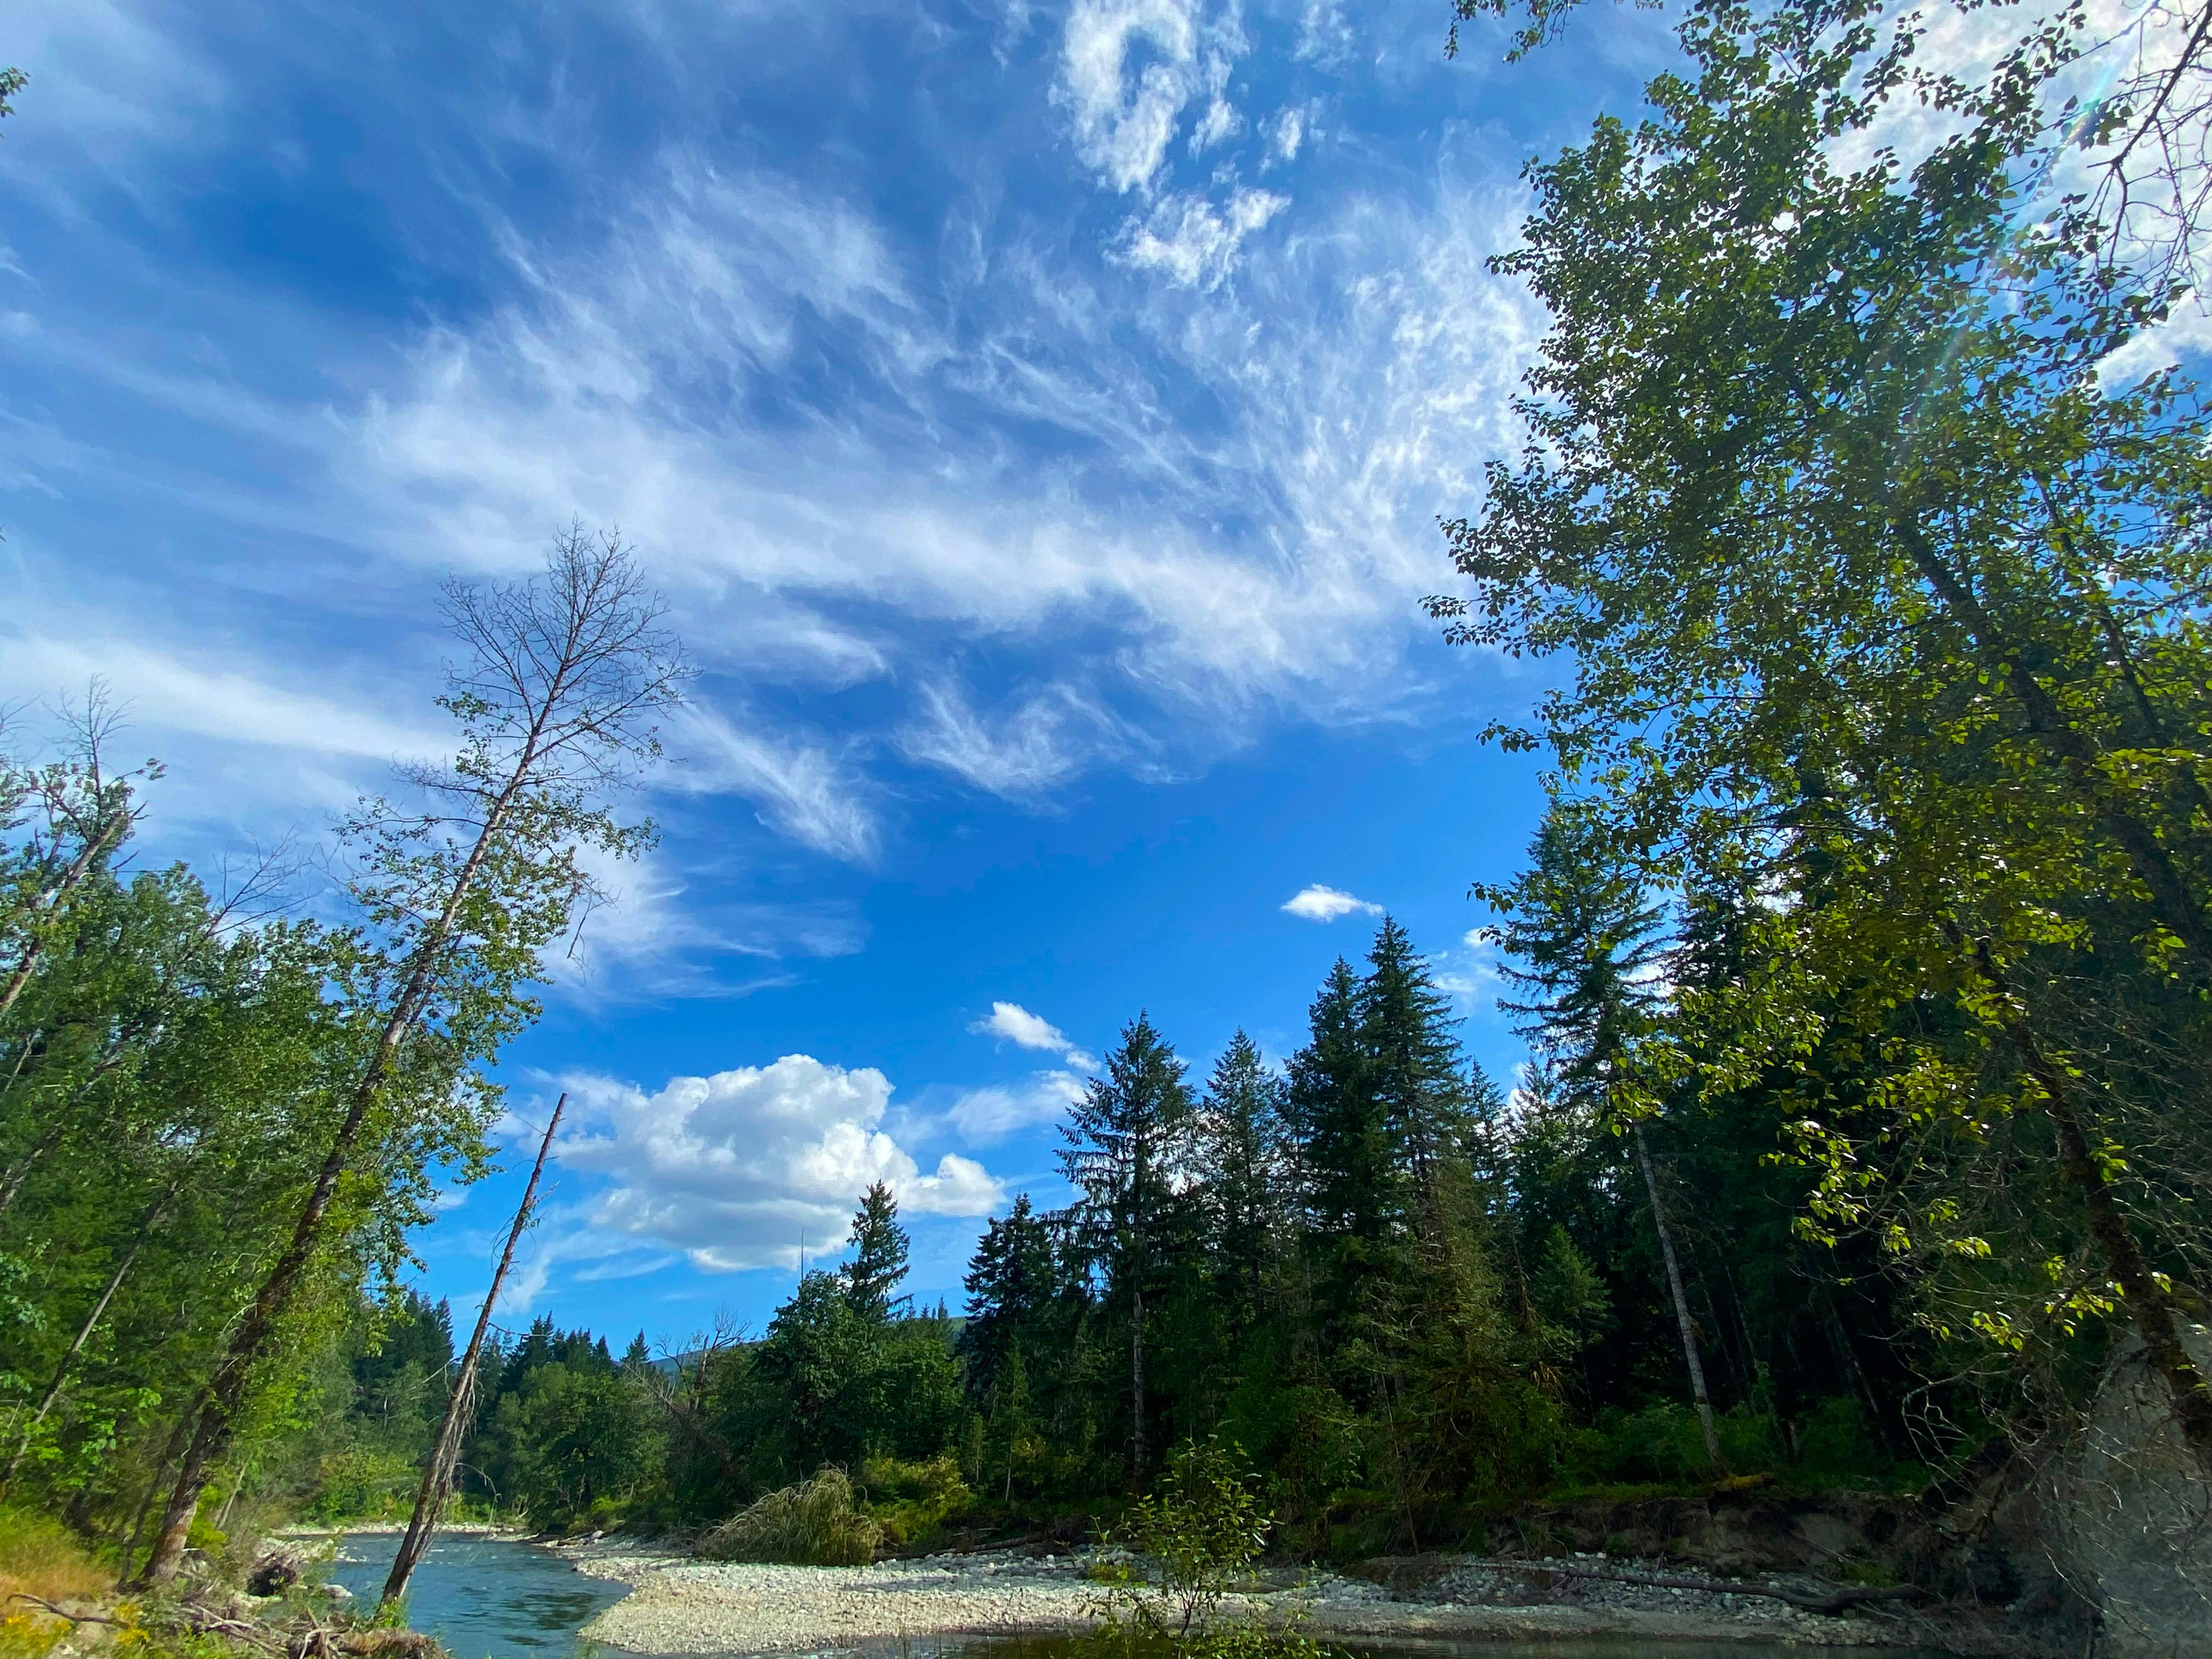 A photo looking across and down the river with a expanse of blue sky and wispy clouds edged by tall green trees